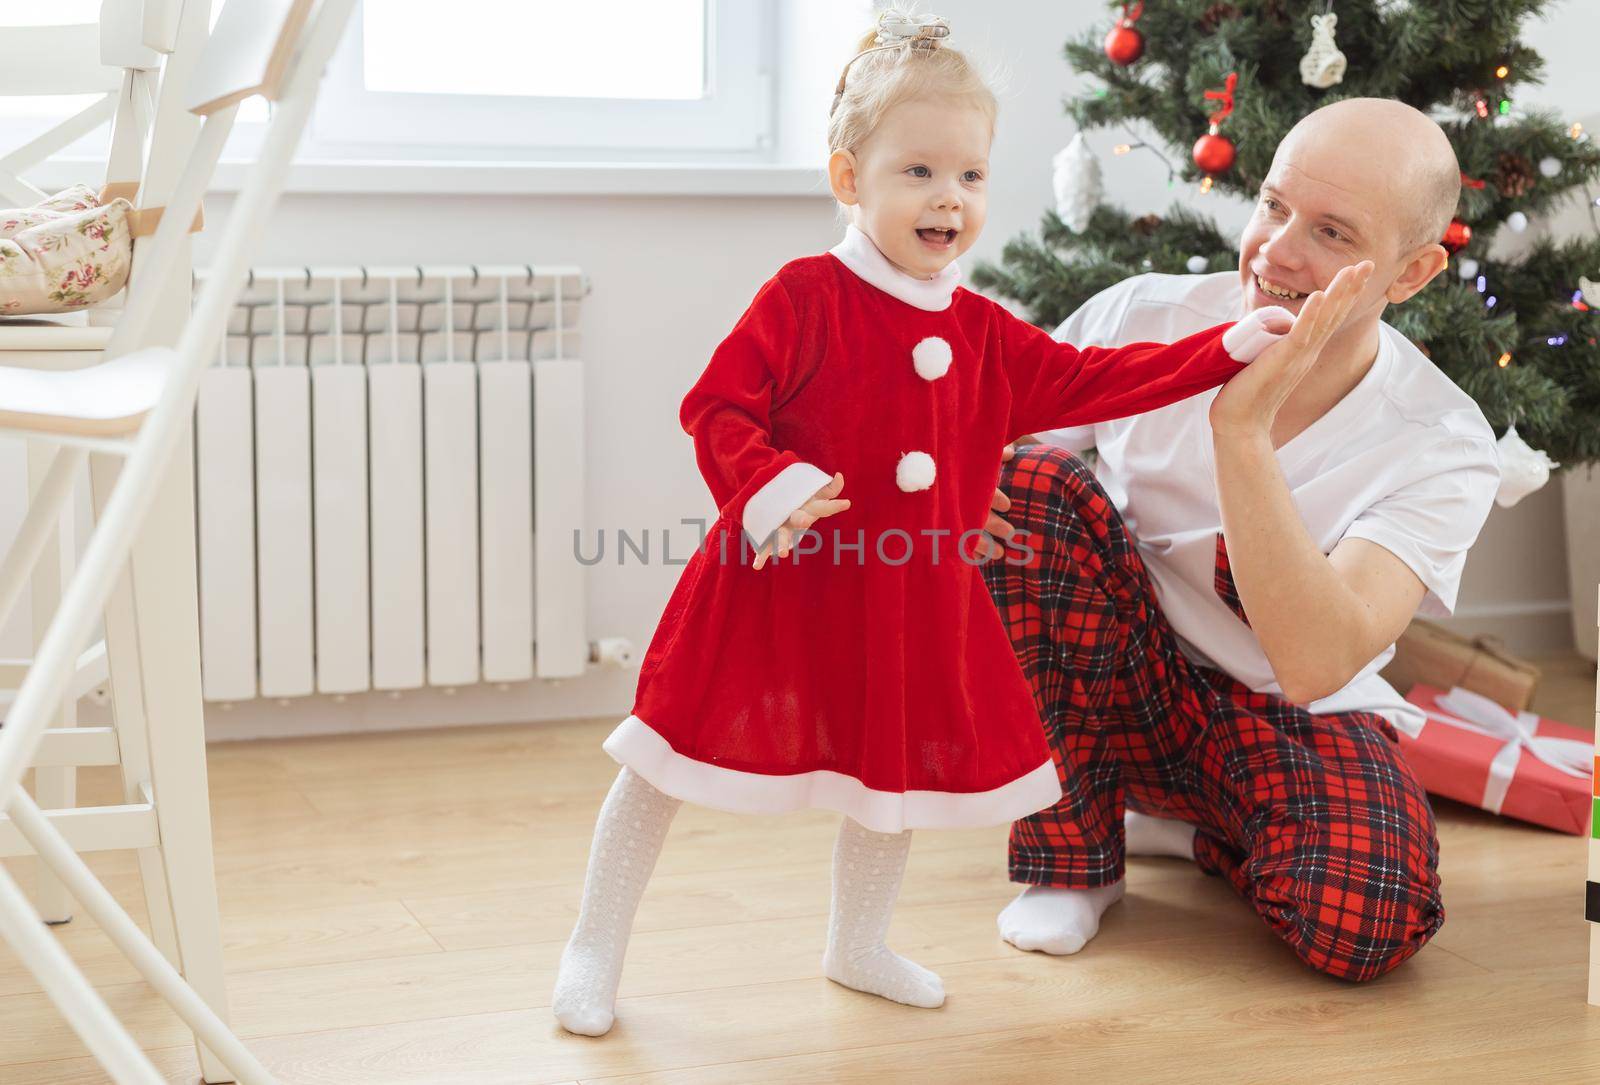 Toddler child with cochlear implant plays with father under christmas tree - deafness and innovating medical technologies for hearing aid by Satura86